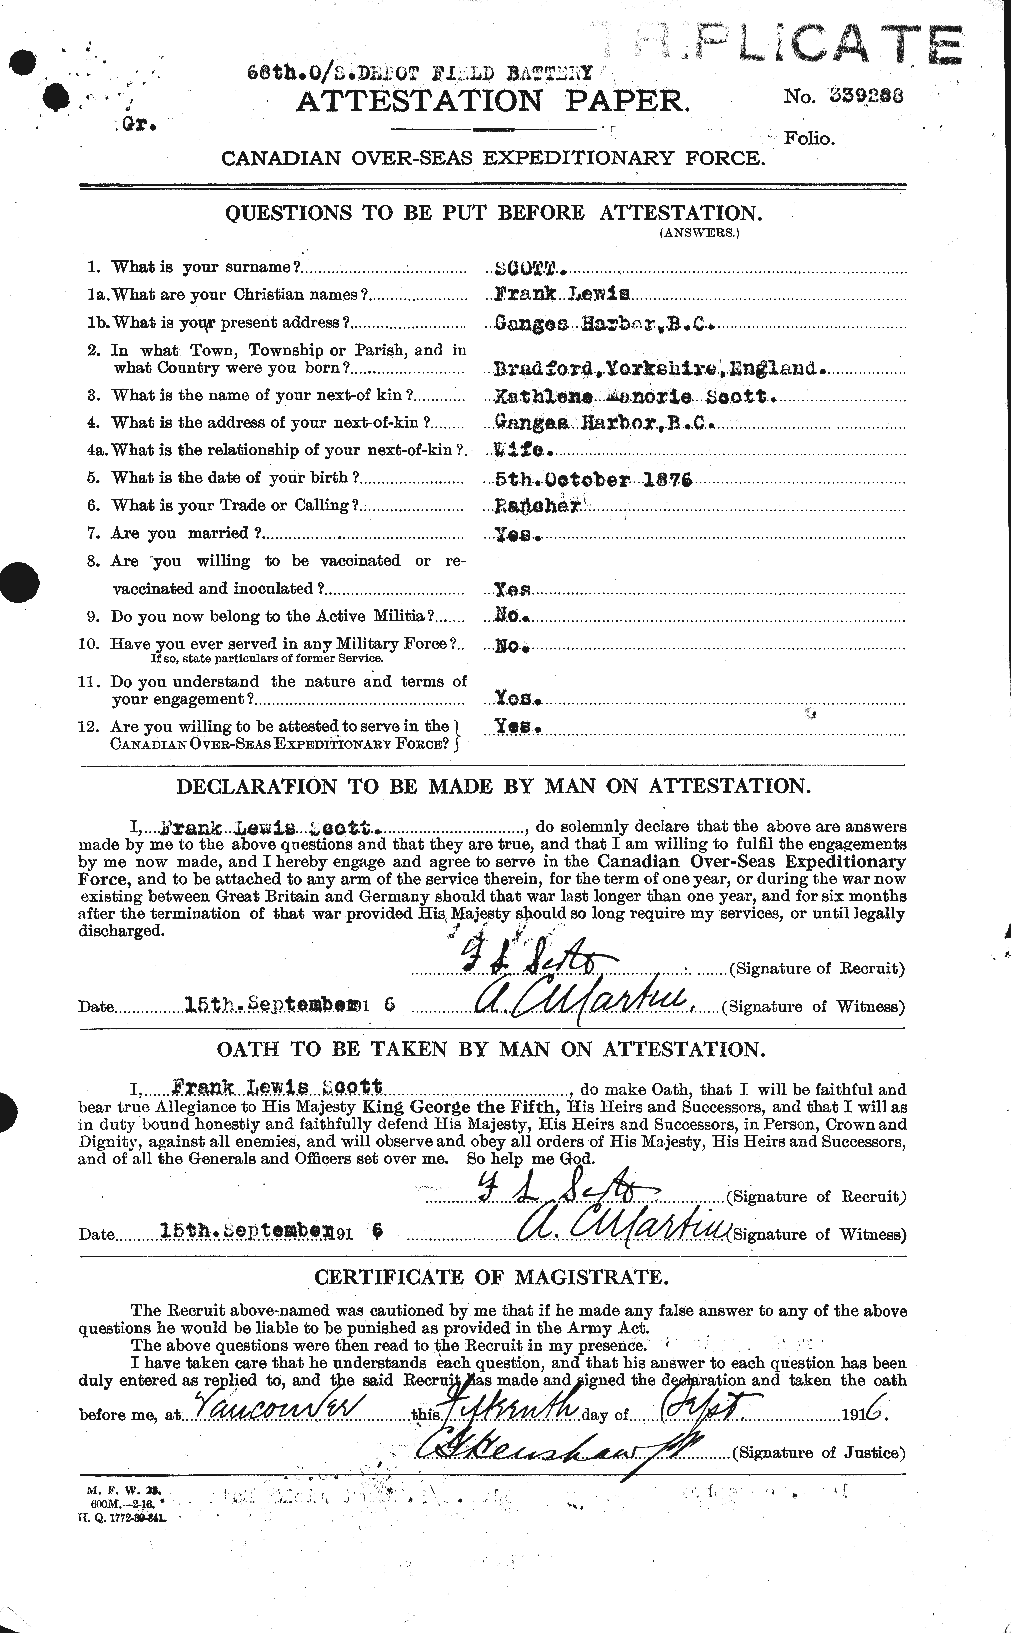 Personnel Records of the First World War - CEF 084698a